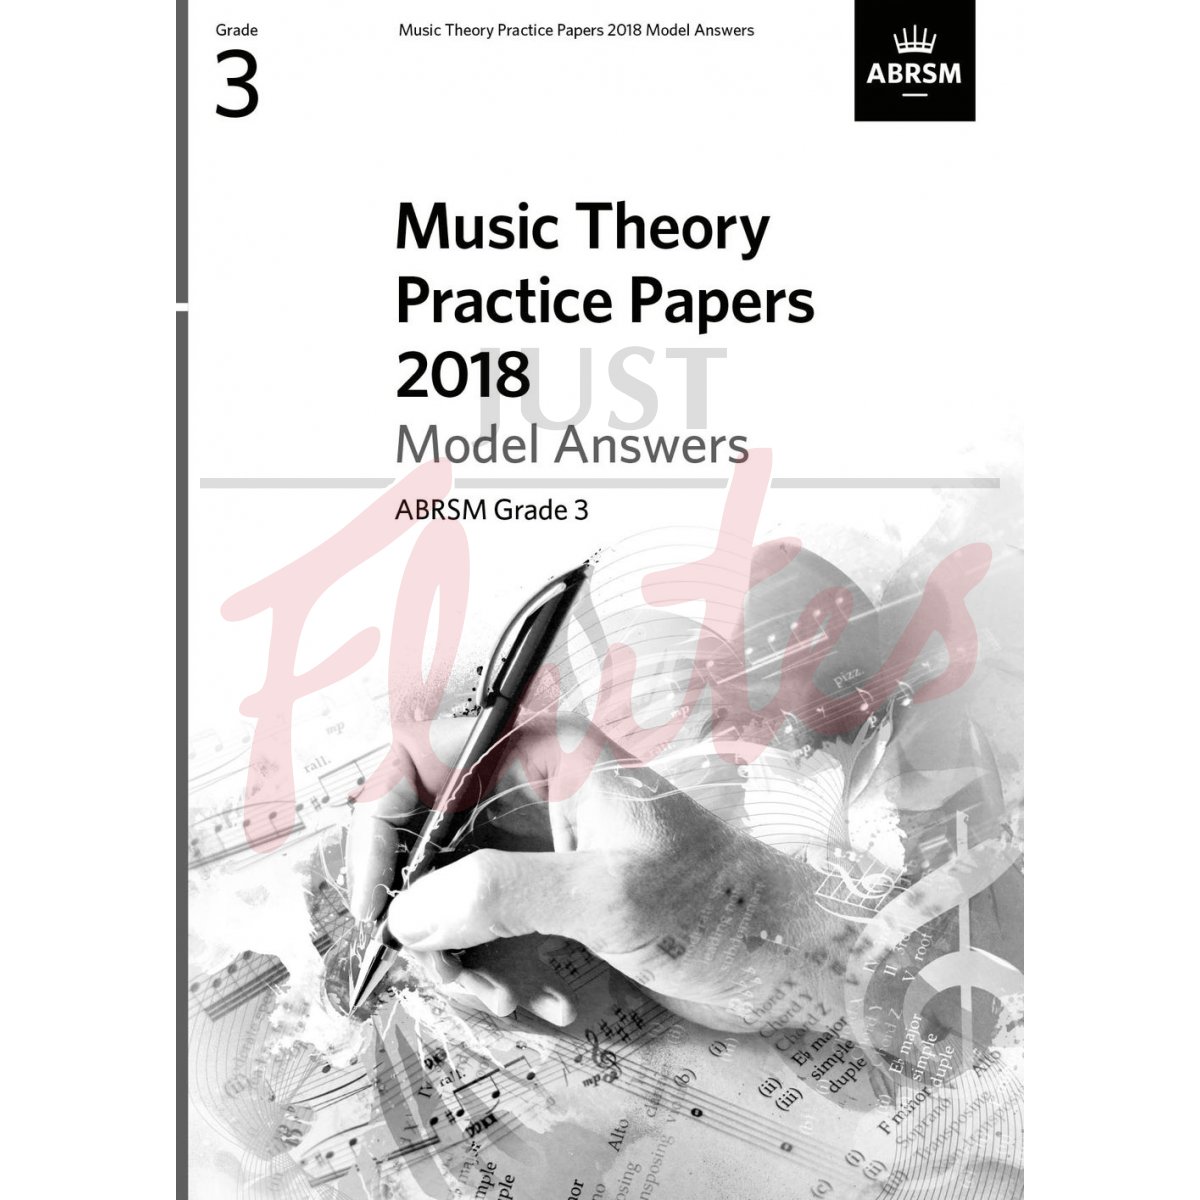 Music Theory Practice Papers 2018 Grade 3 - Model Answers